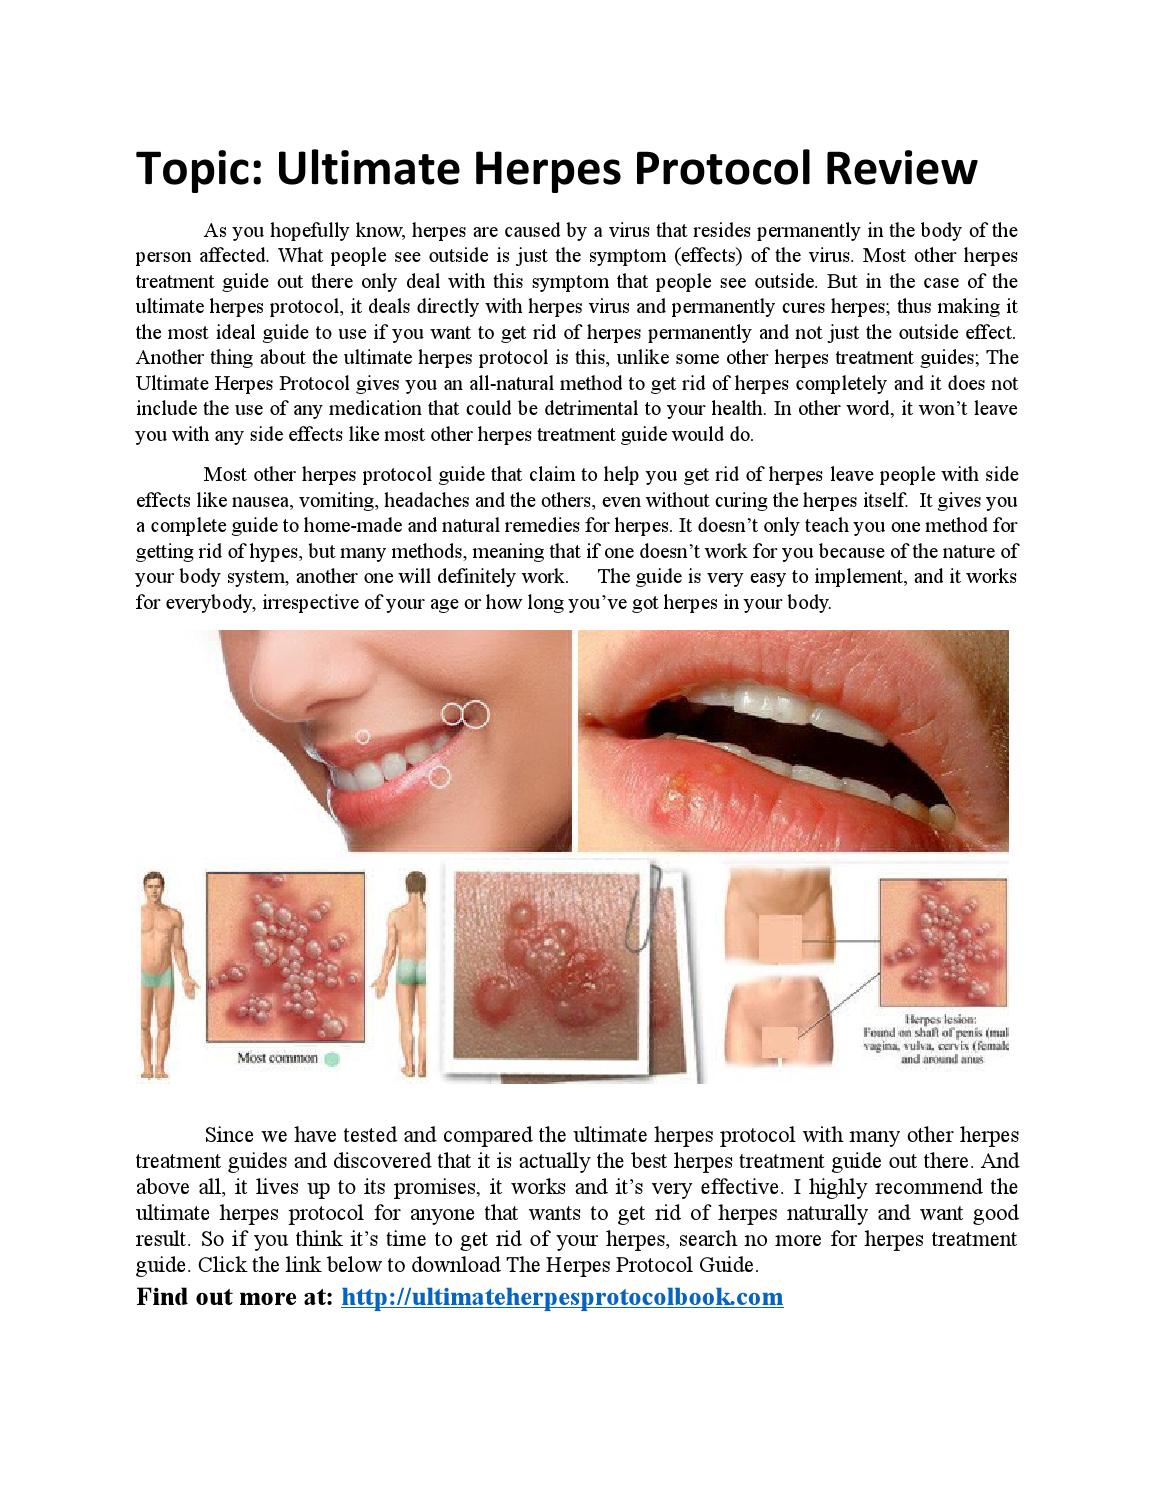 Ultimate Herpes protocol Review by jennifermaryy